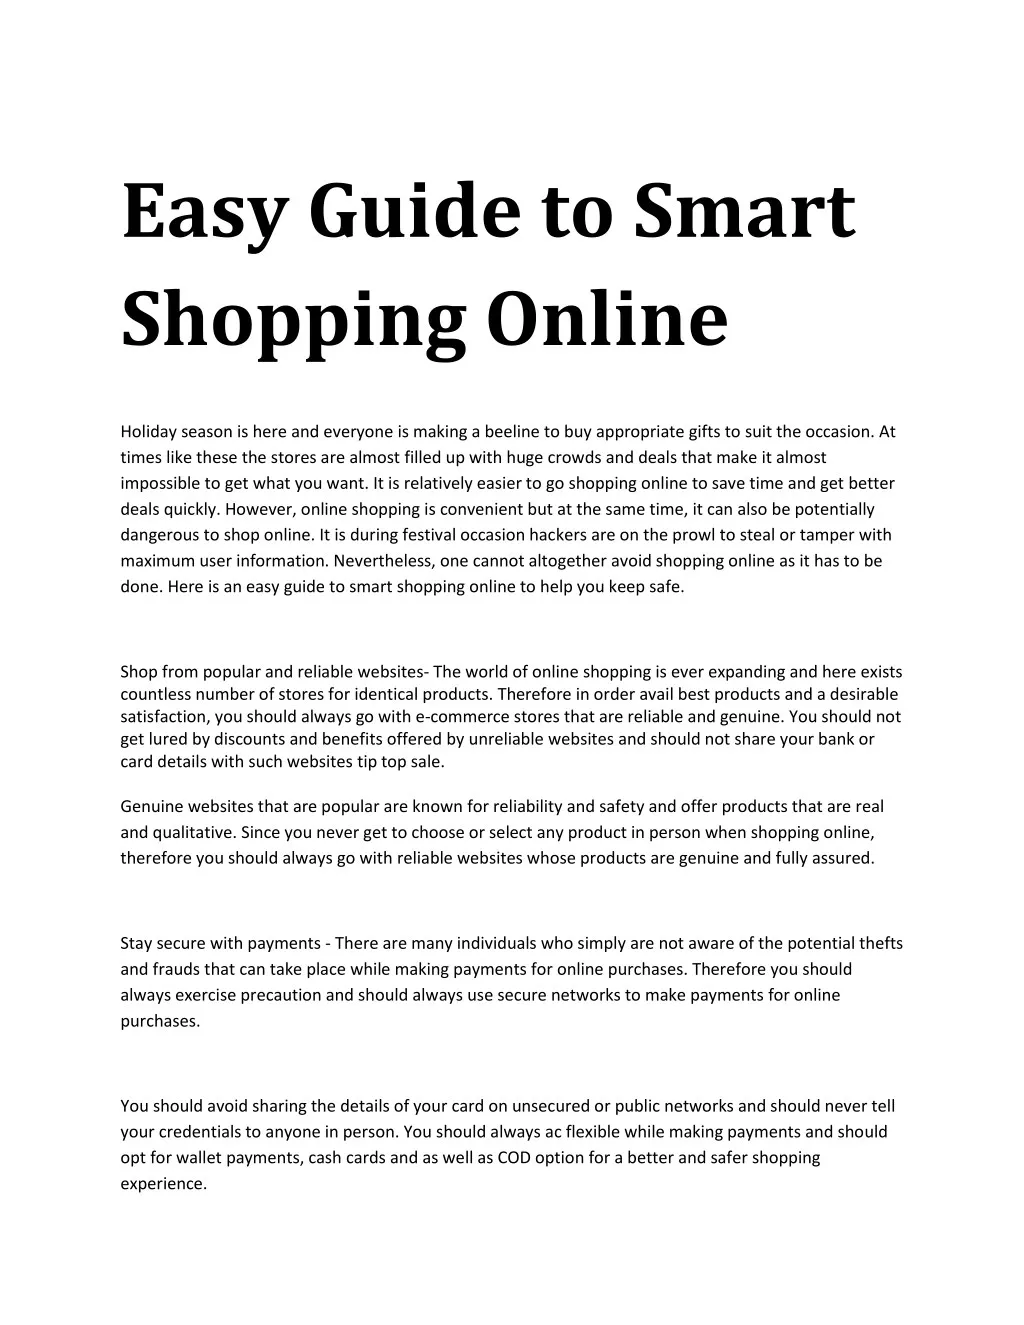 easy guide to smart shopping online